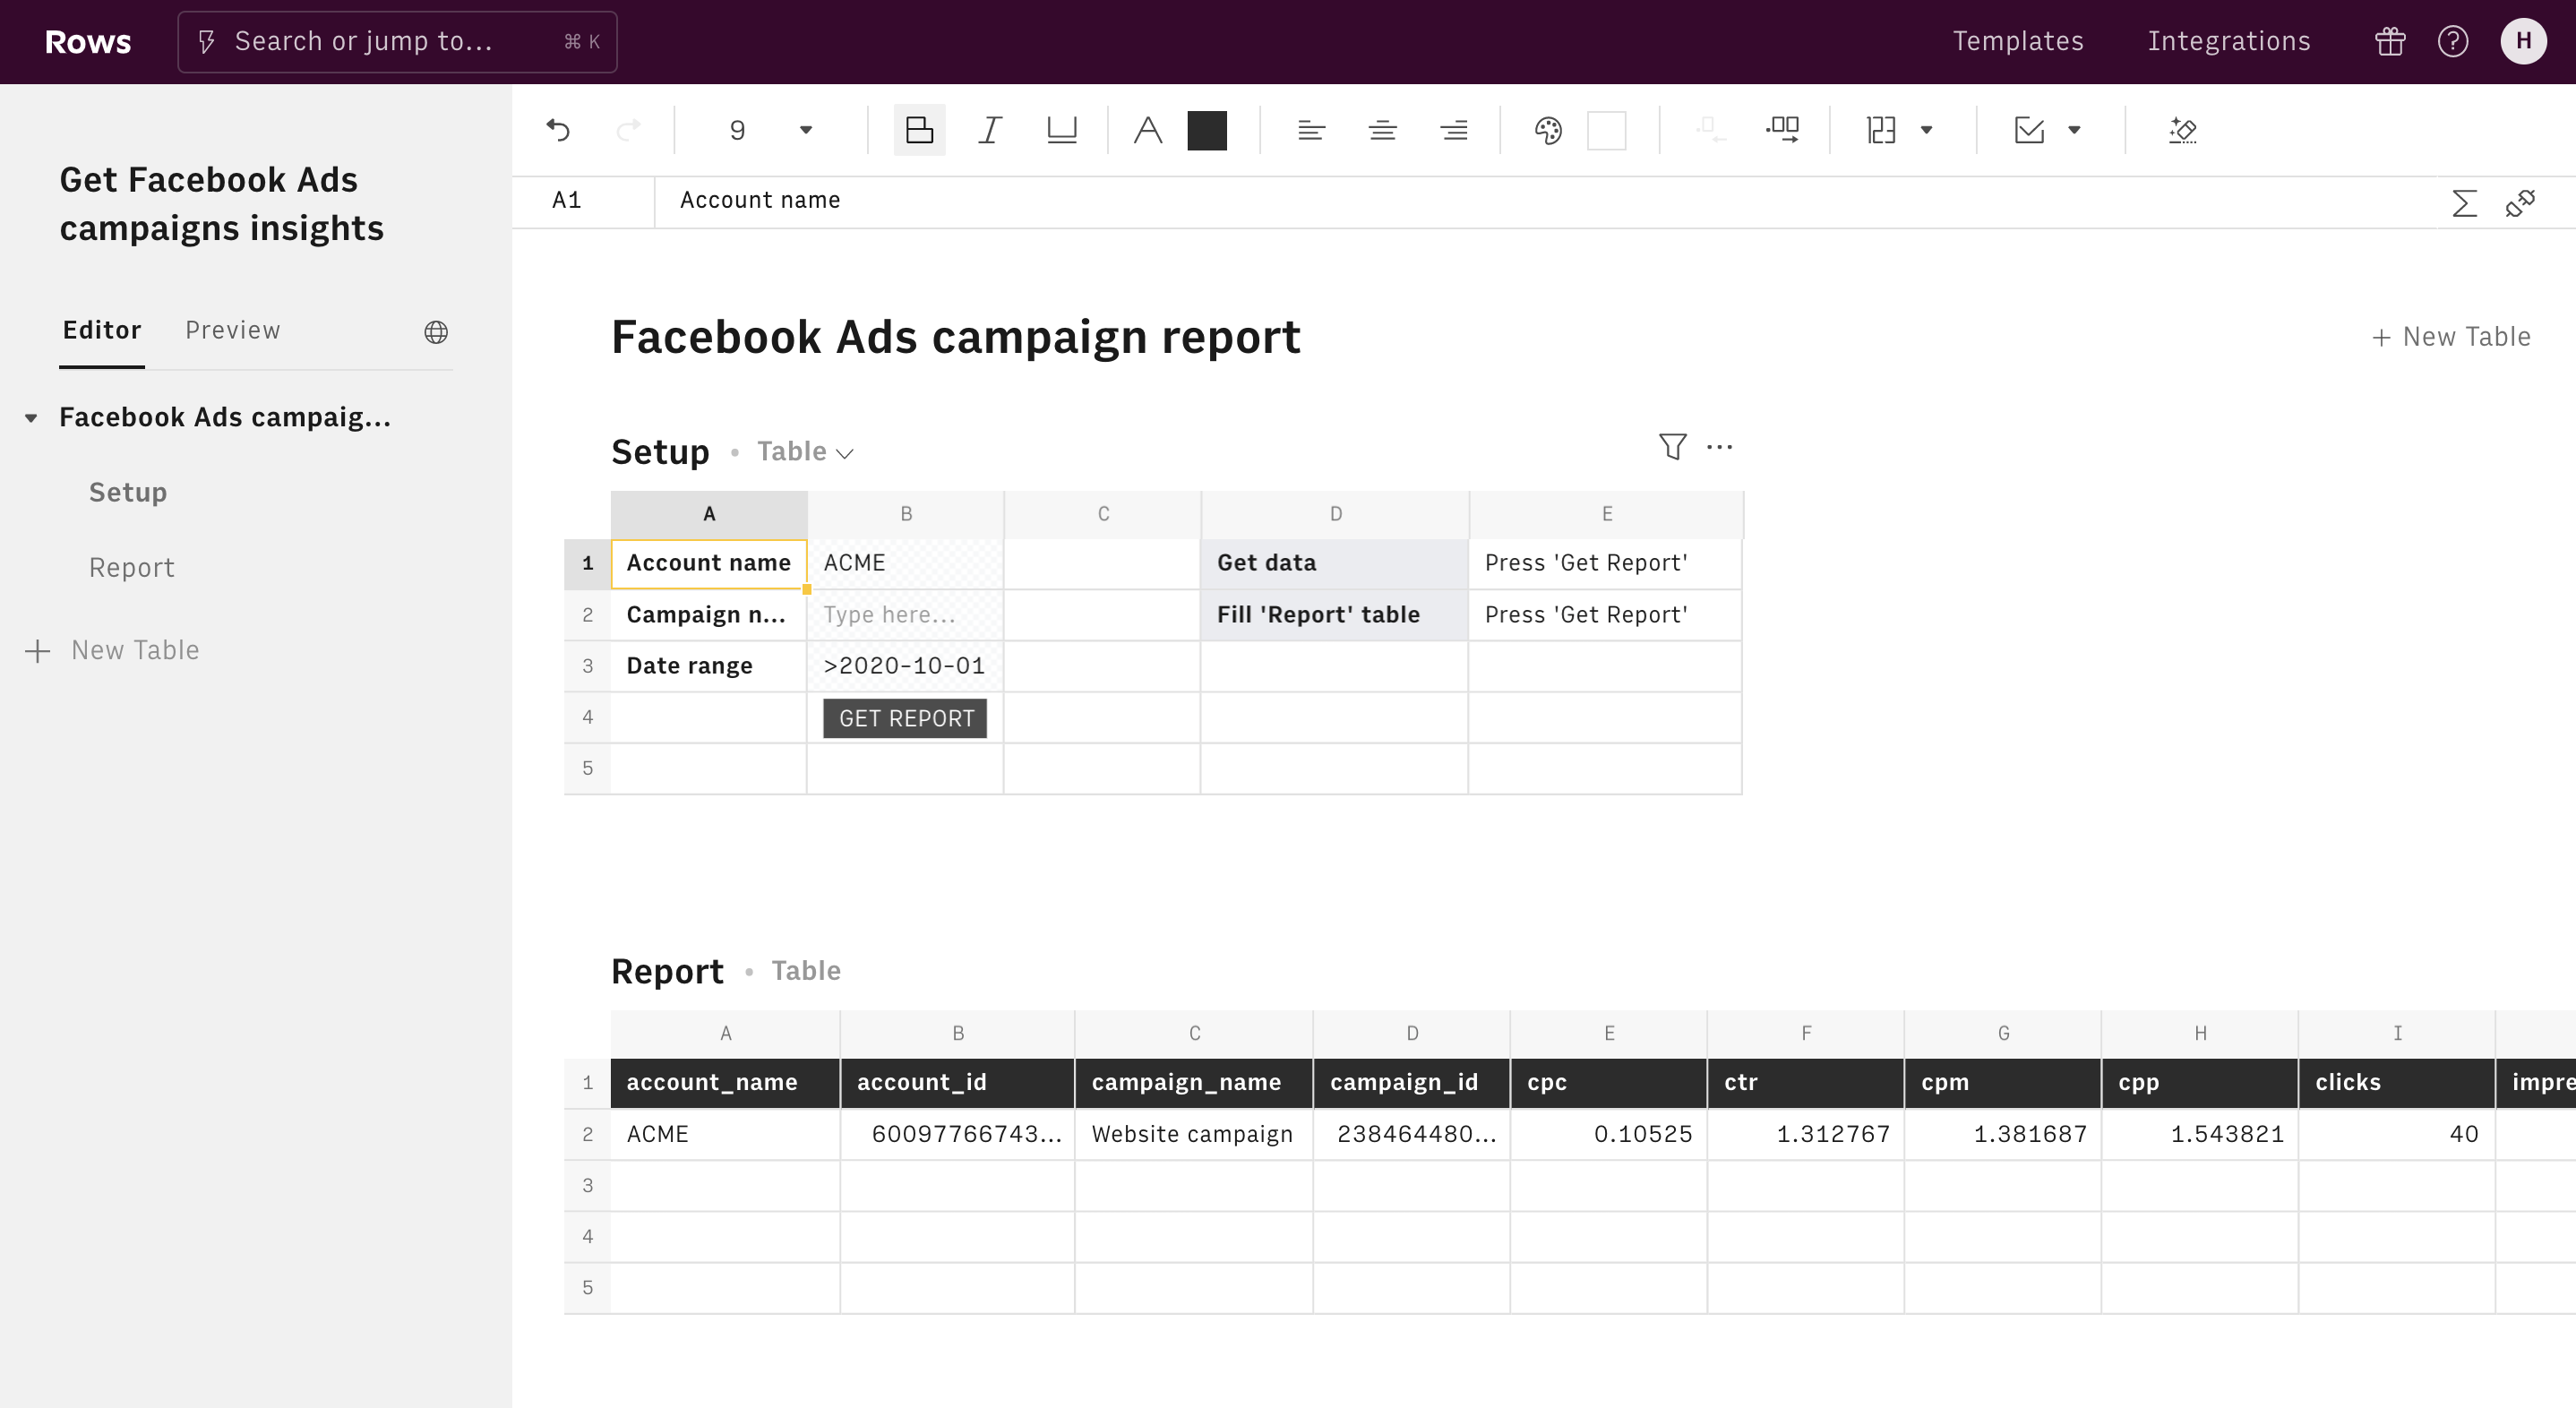 Get Facebook Ads campaigns insights editor 1